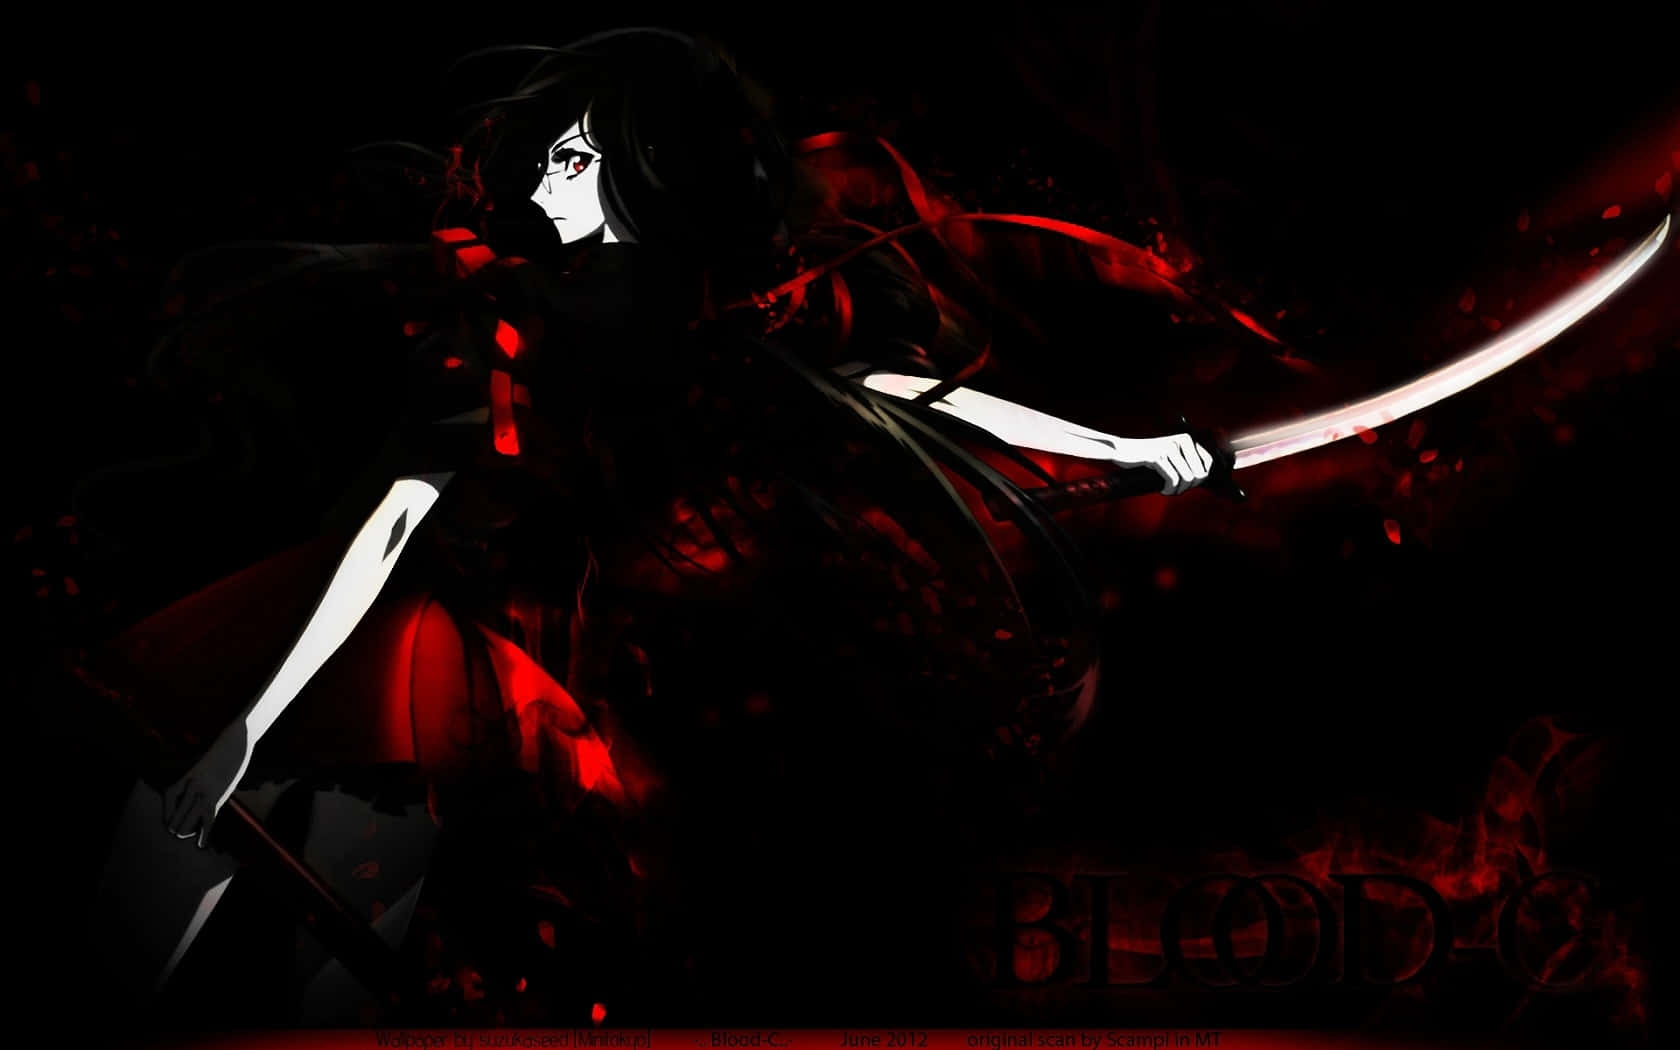 Pin by 𝒥𝑜𝓈𝒾𝑒 𝒜𝓊𝓈𝓉𝑒𝓃 on Anime  Manga  Red and black wallpaper  Red art Red pictures